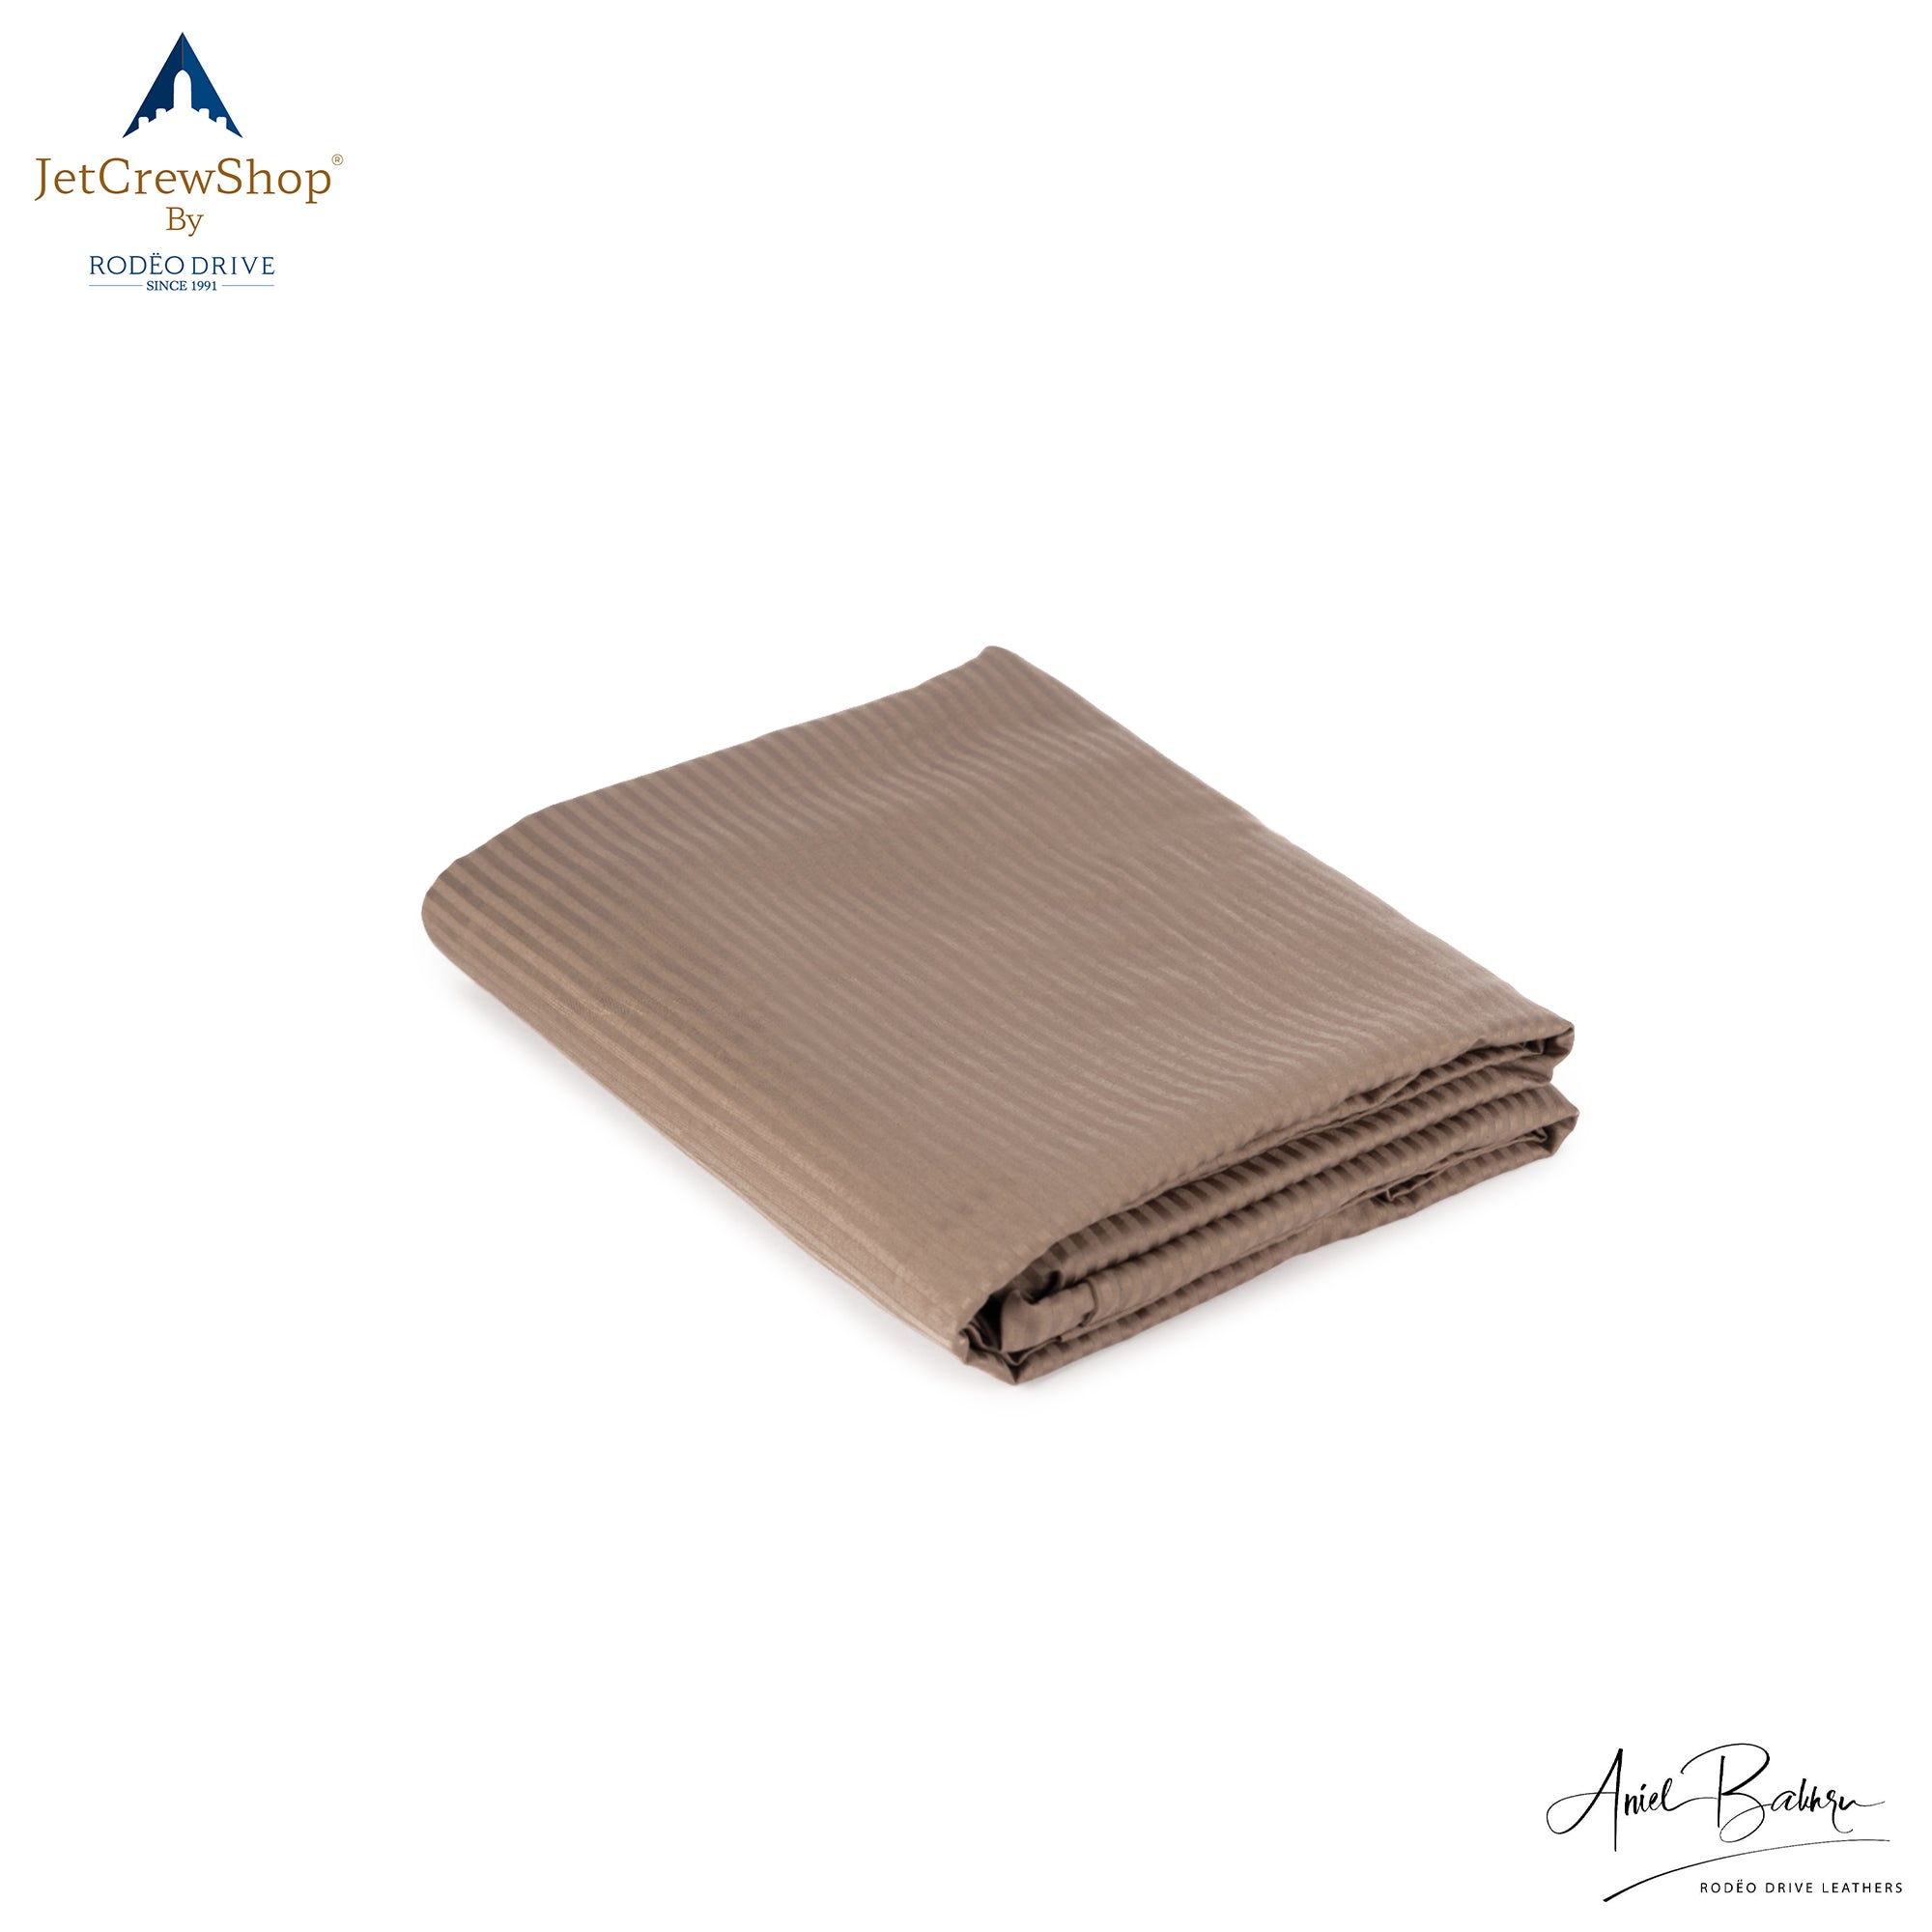 Image of folded sleeping sack. It is light colored